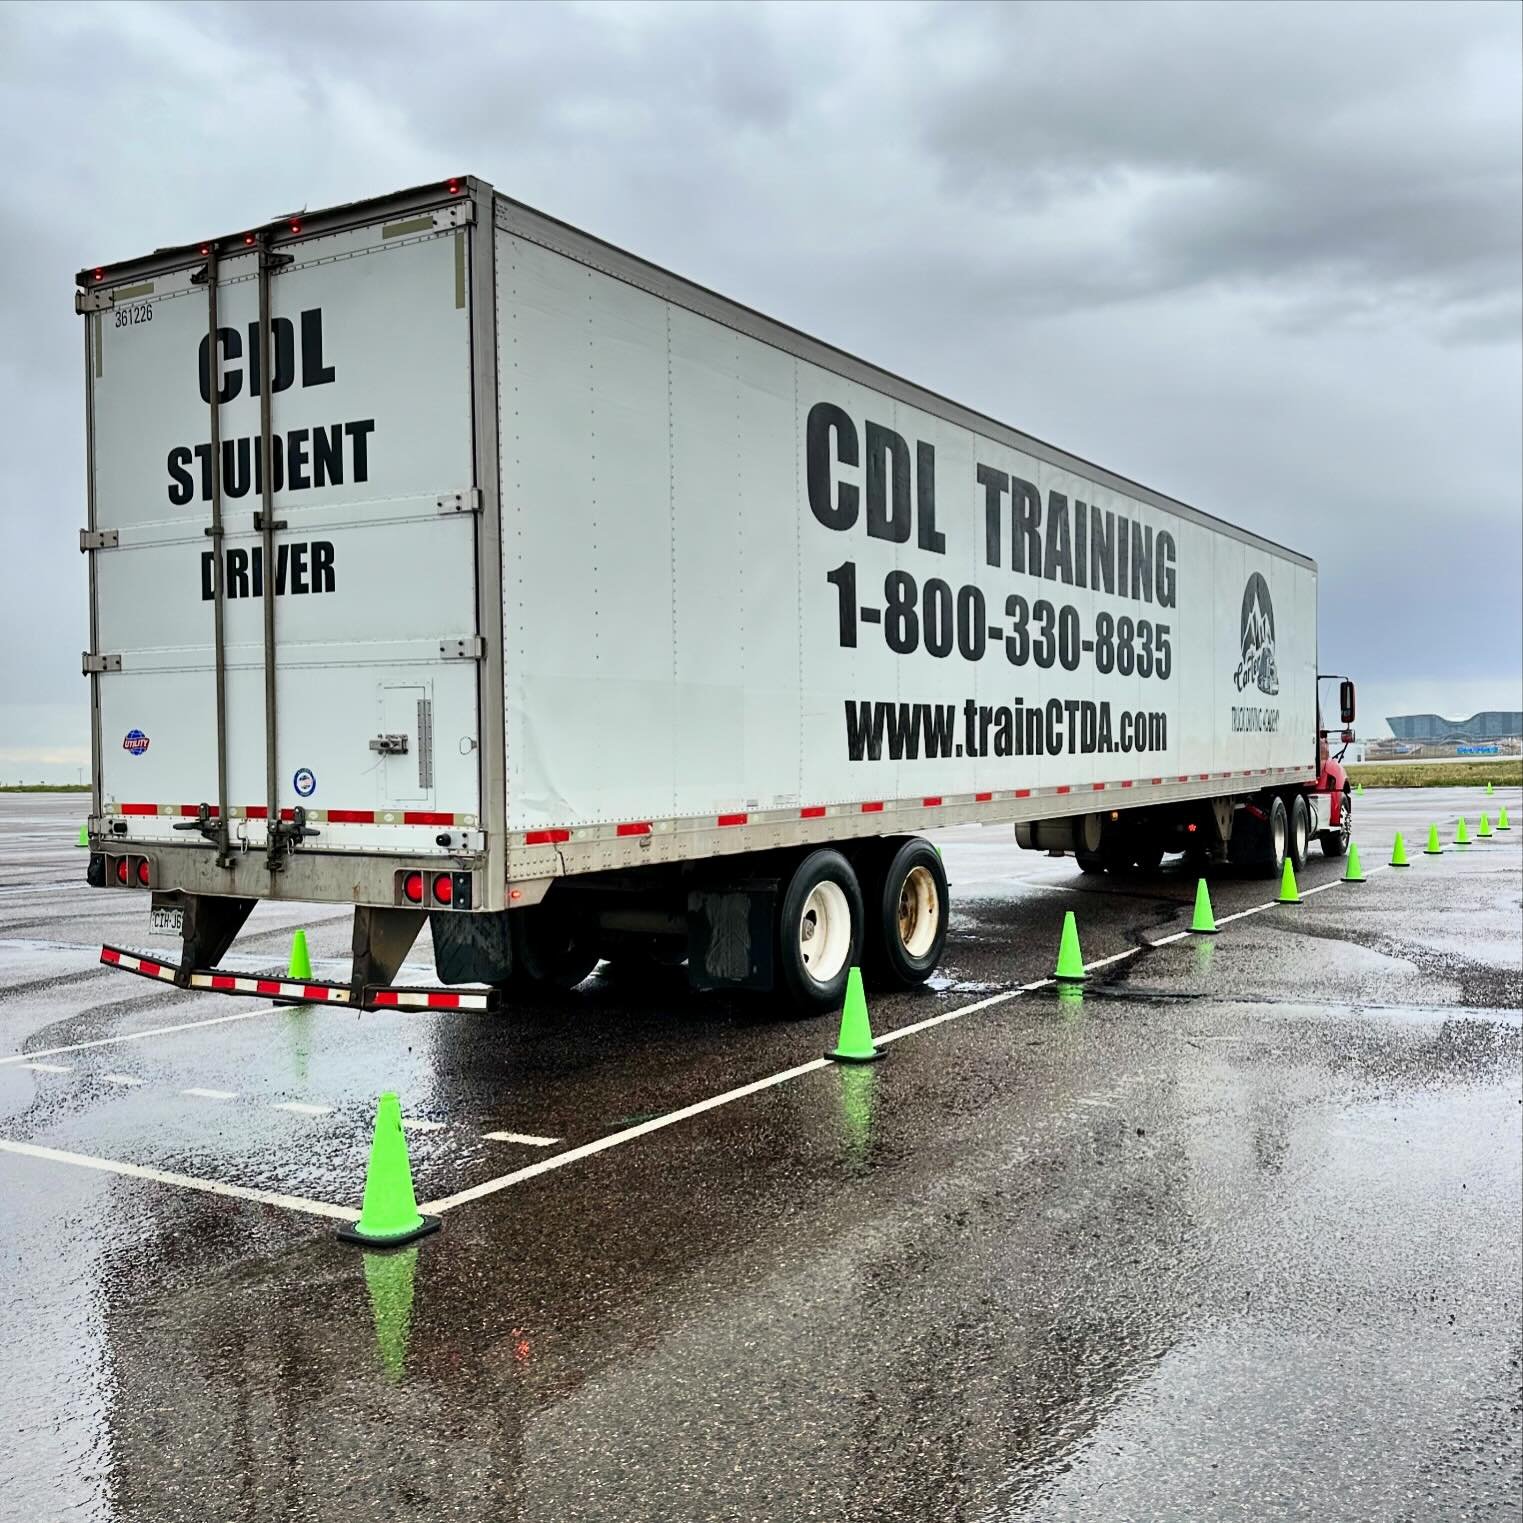 Despite the rain, everyone did great on their tests today! 🌧️ ☔️ 🚛 #drivepointcdlacademy